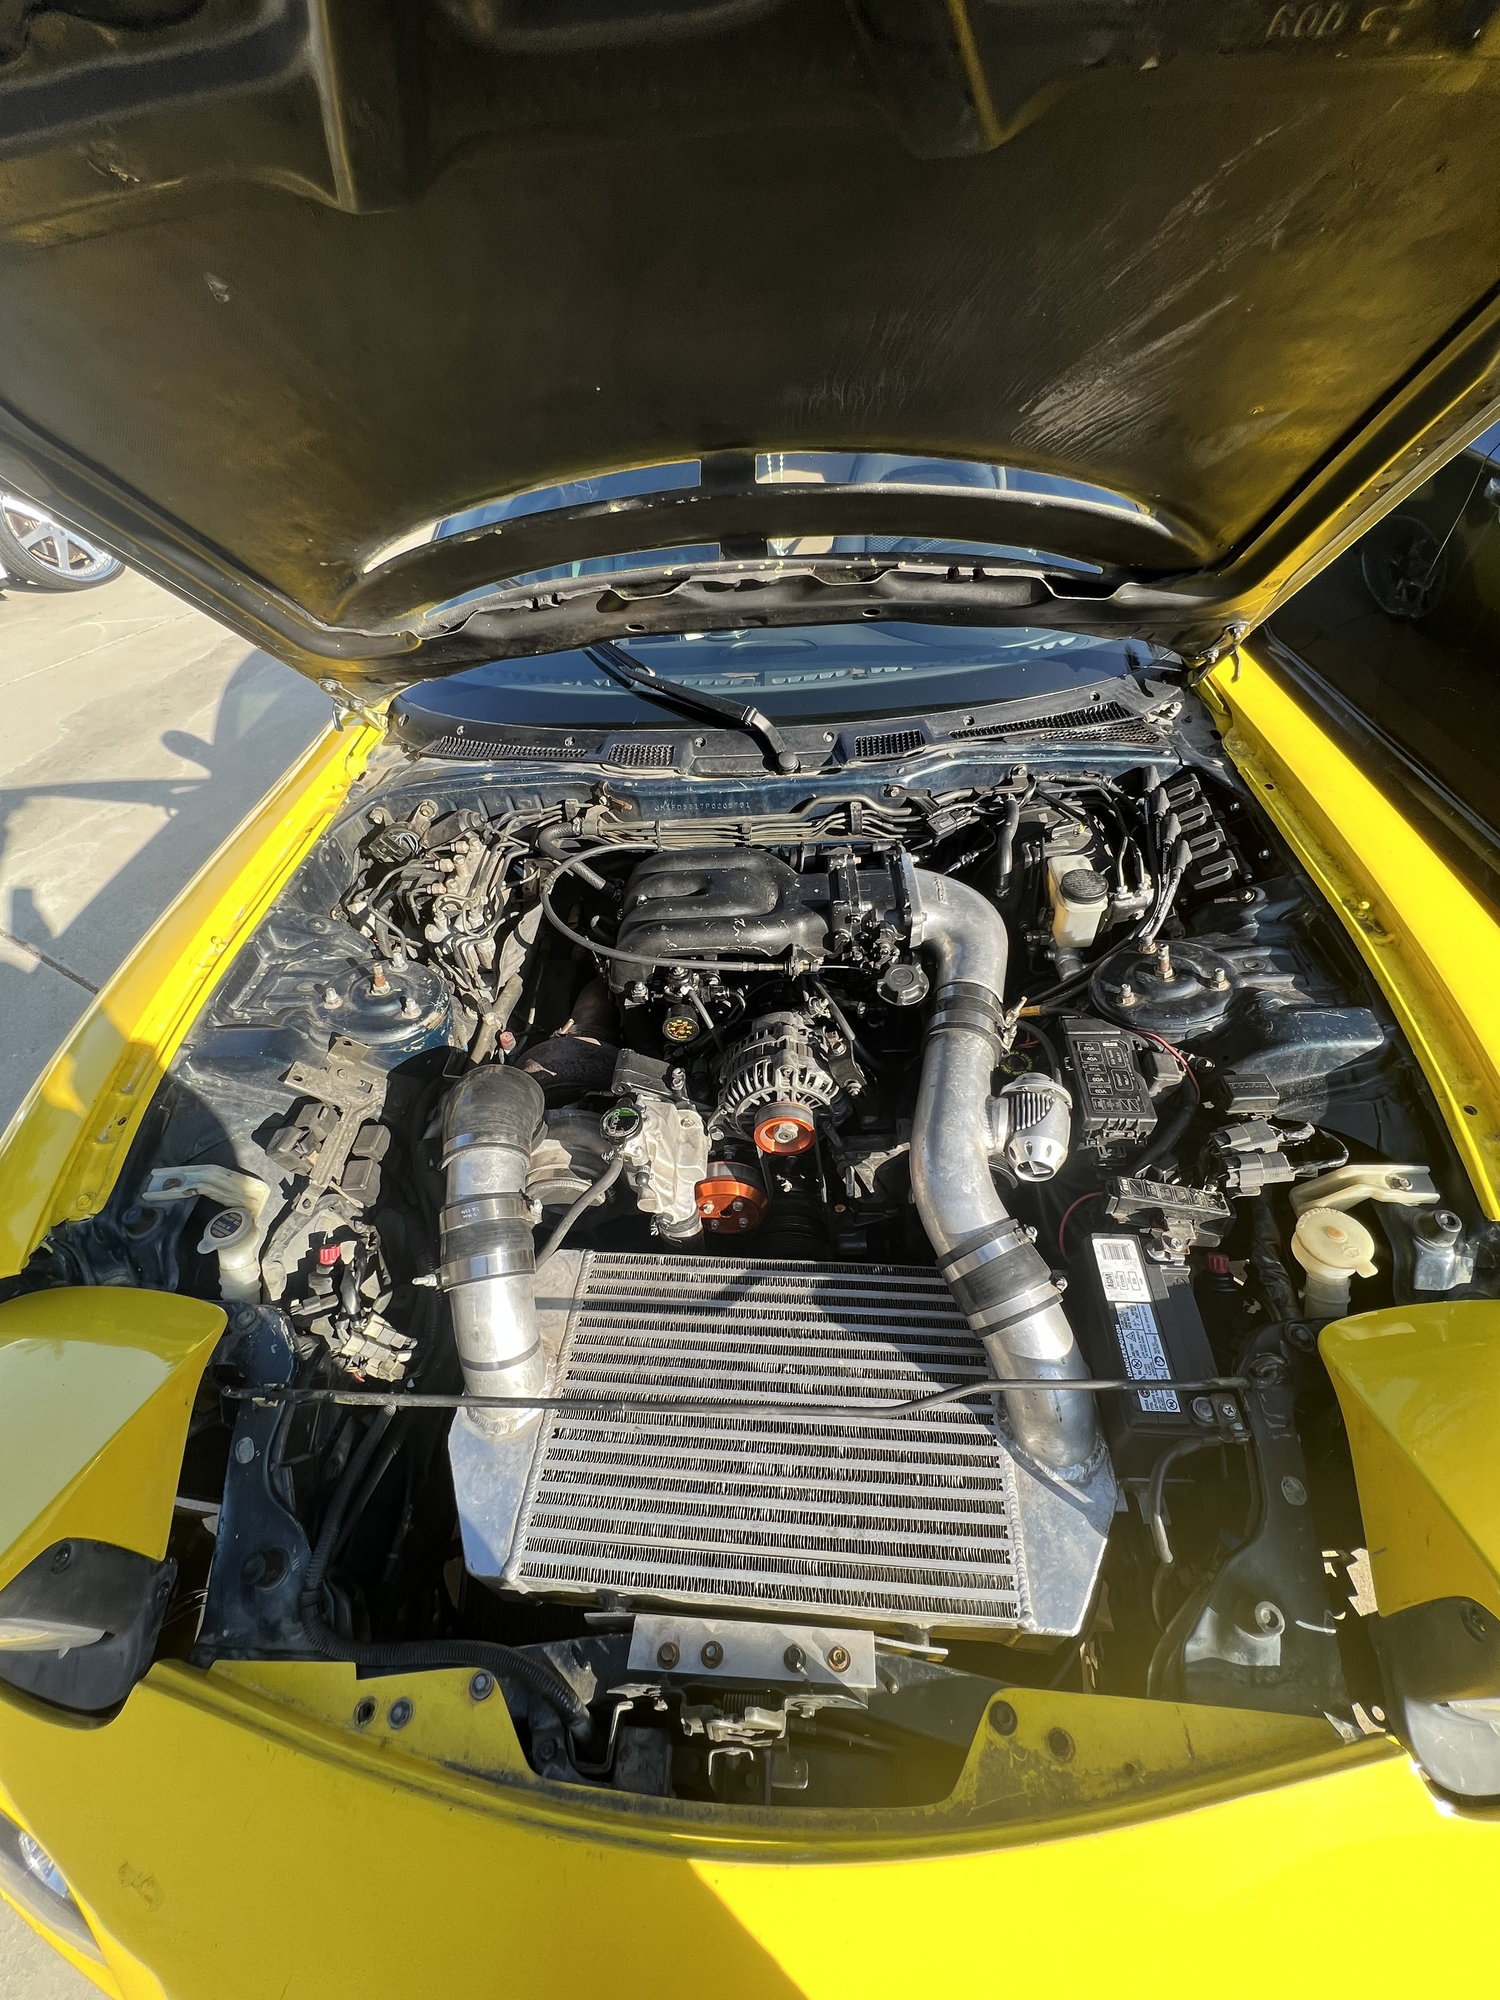 1993 Mazda RX-7 - SELLING 1993 Mazda RX-7 - Used - VIN JM1FD3317P0205751 - 125,000 Miles - Other - 2WD - Manual - Yellow - Escondido, CA 92025, United States